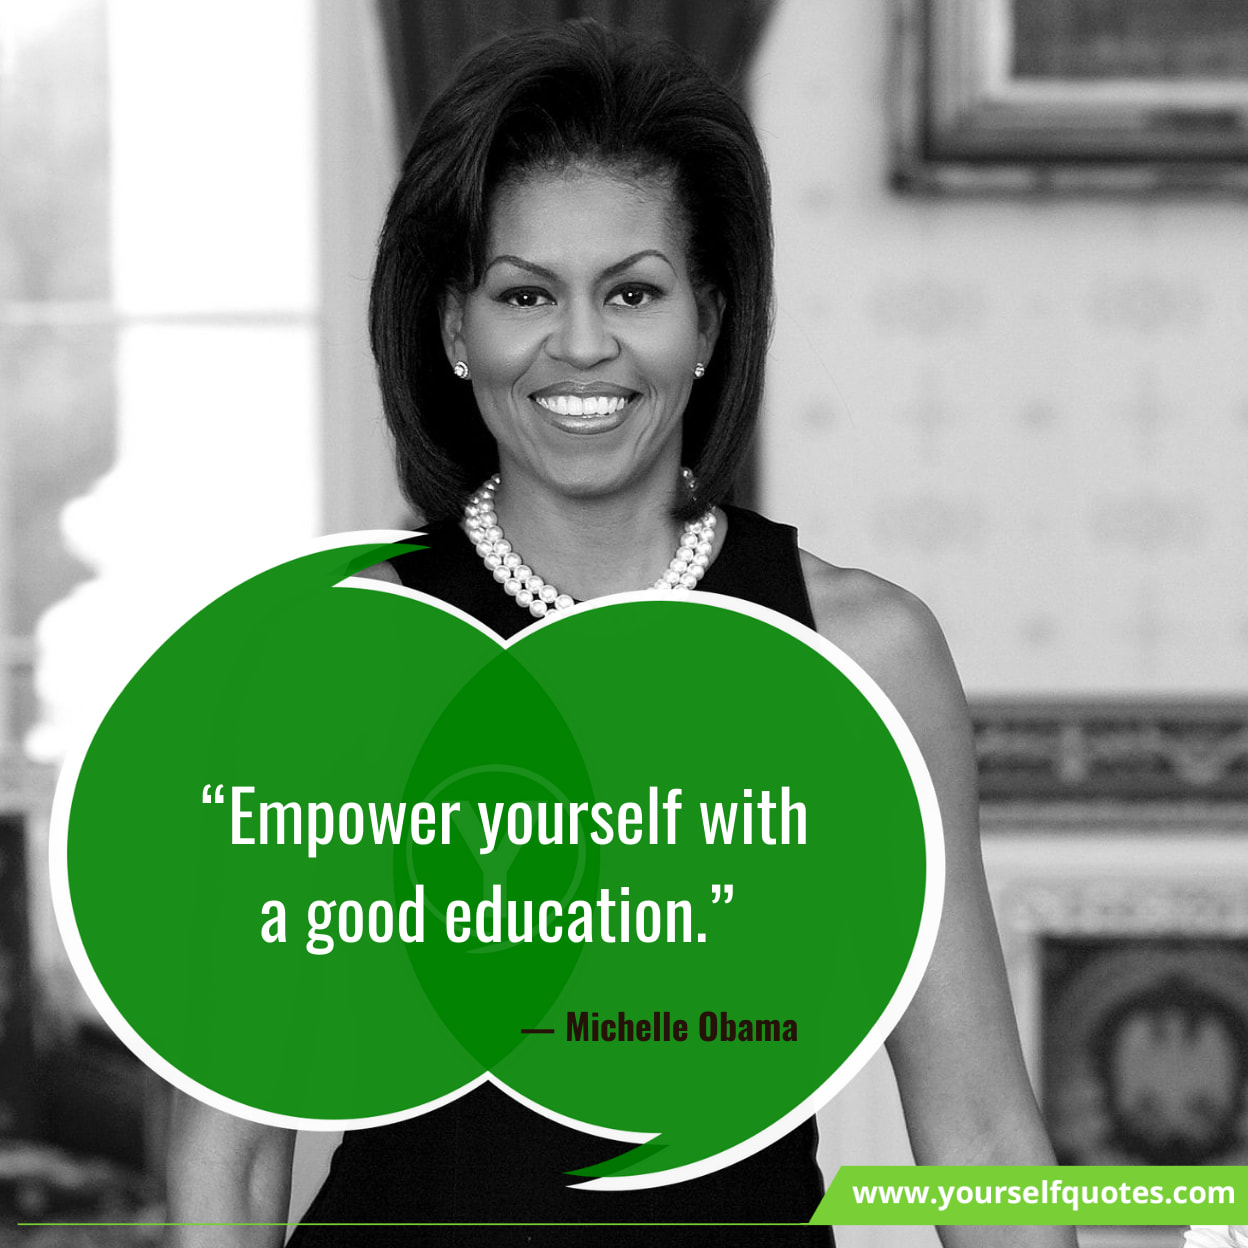 Michelle Obama Quotes About Education